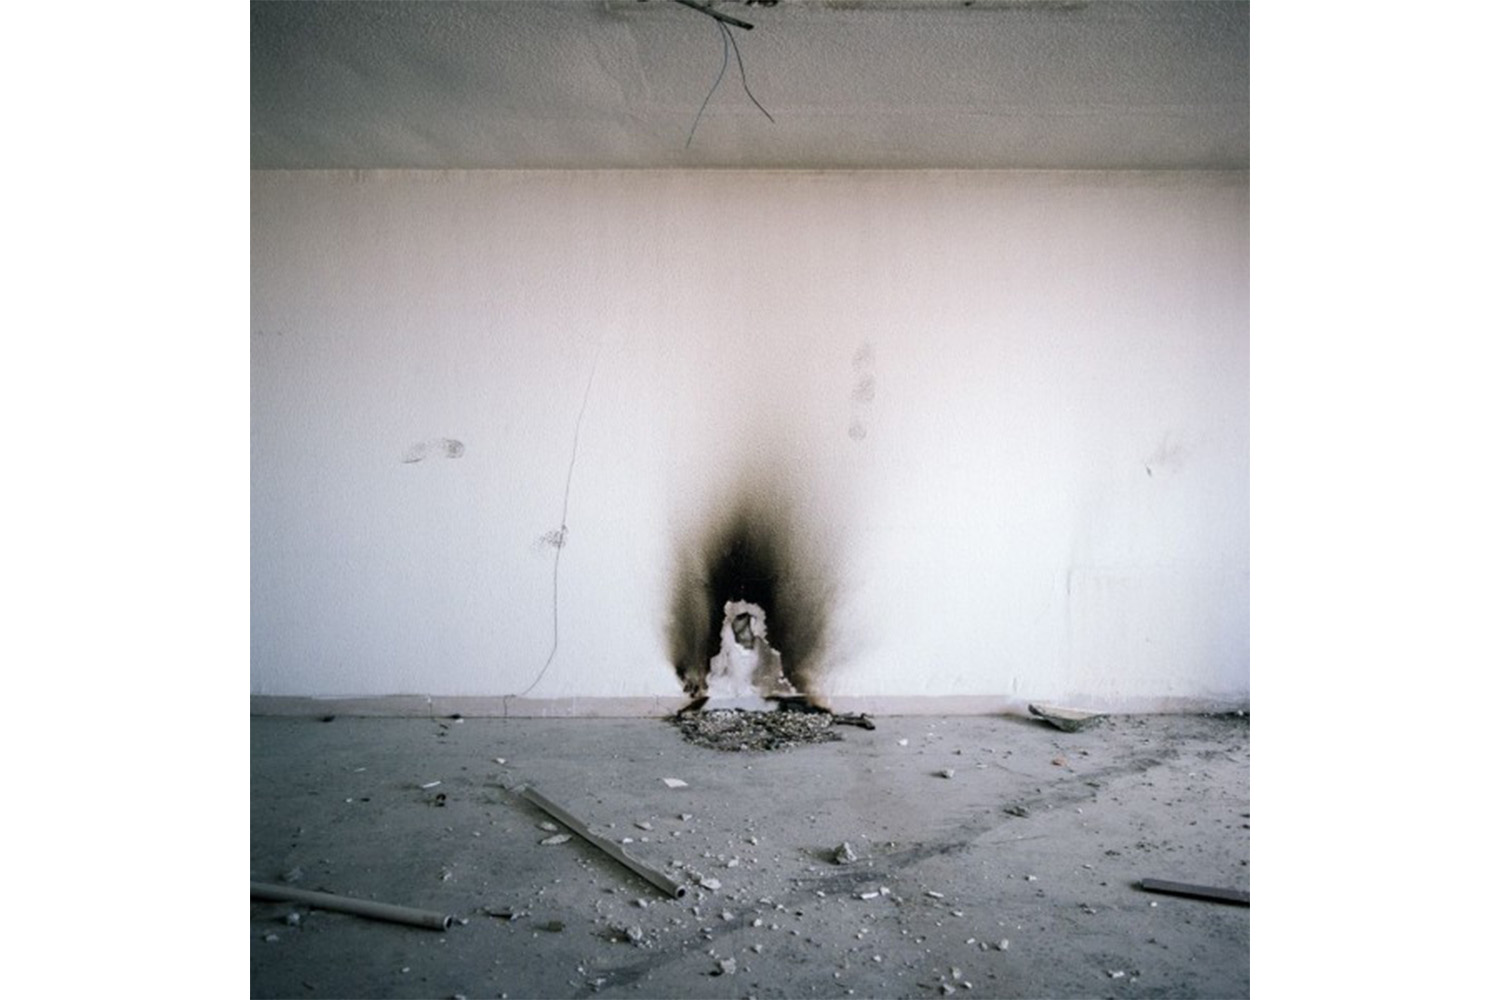 Redeployment_52, from the series ''Nothing Suprising'', 2008